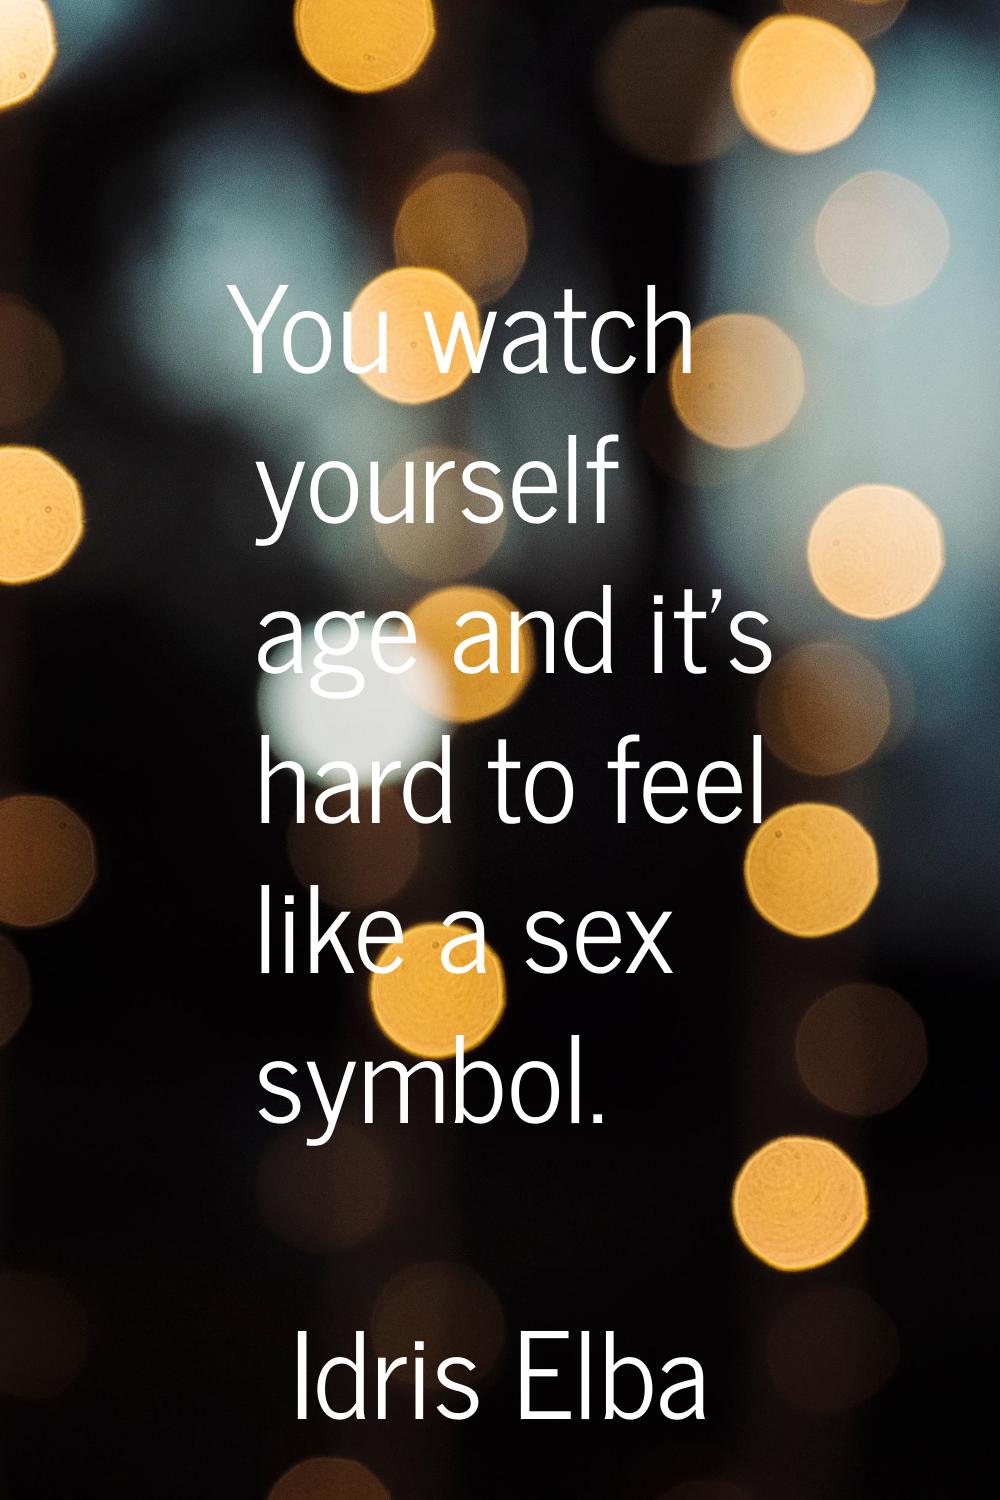 You watch yourself age and it's hard to feel like a sex symbol.